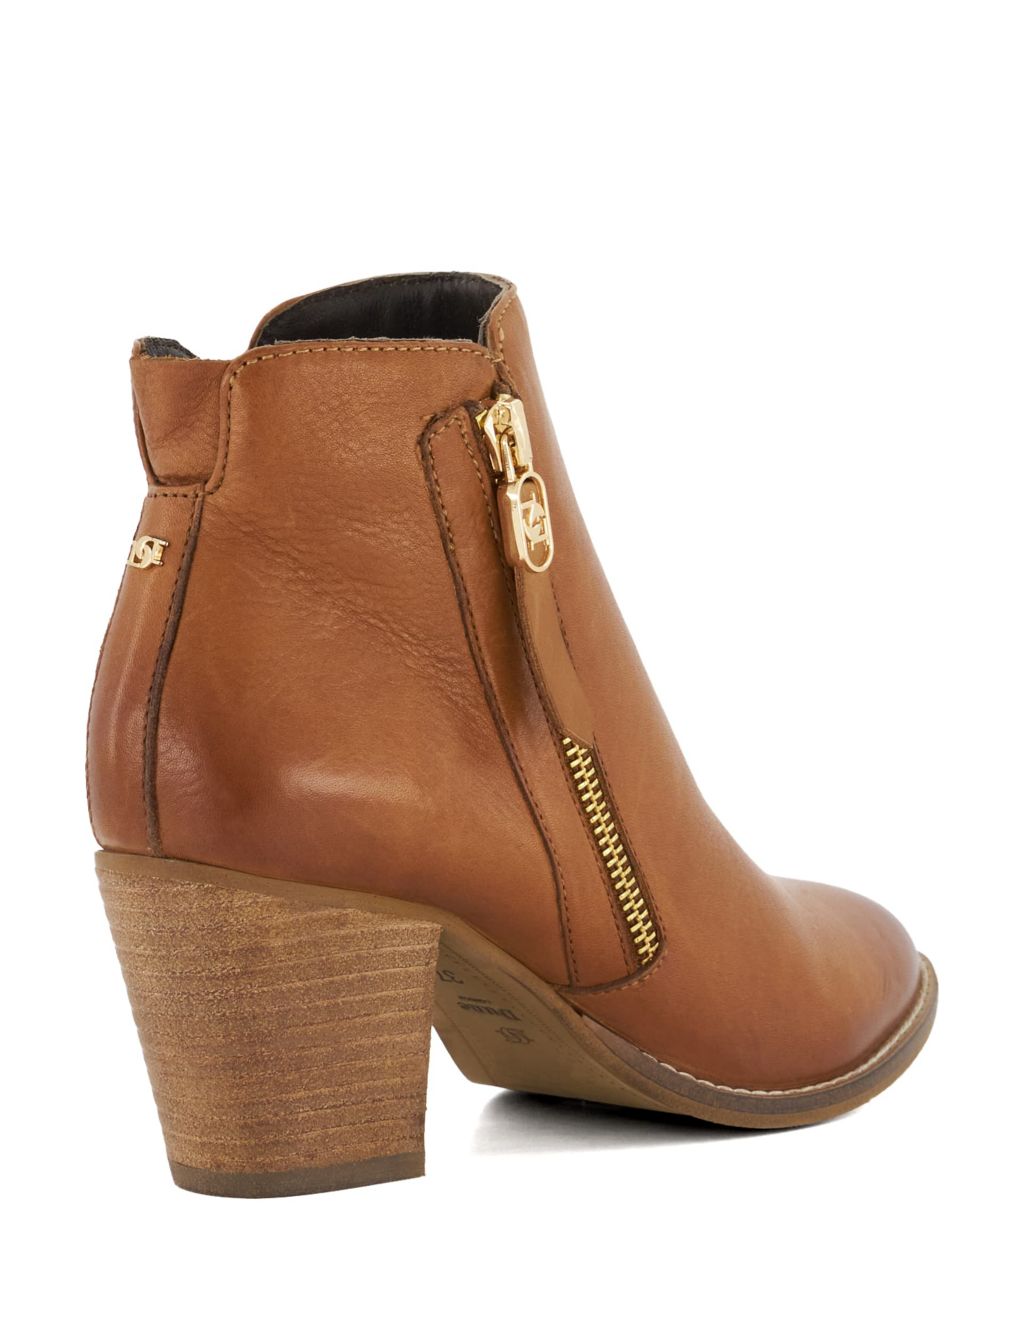 Wide Fit Leather Block Heel Ankle Boots image 4